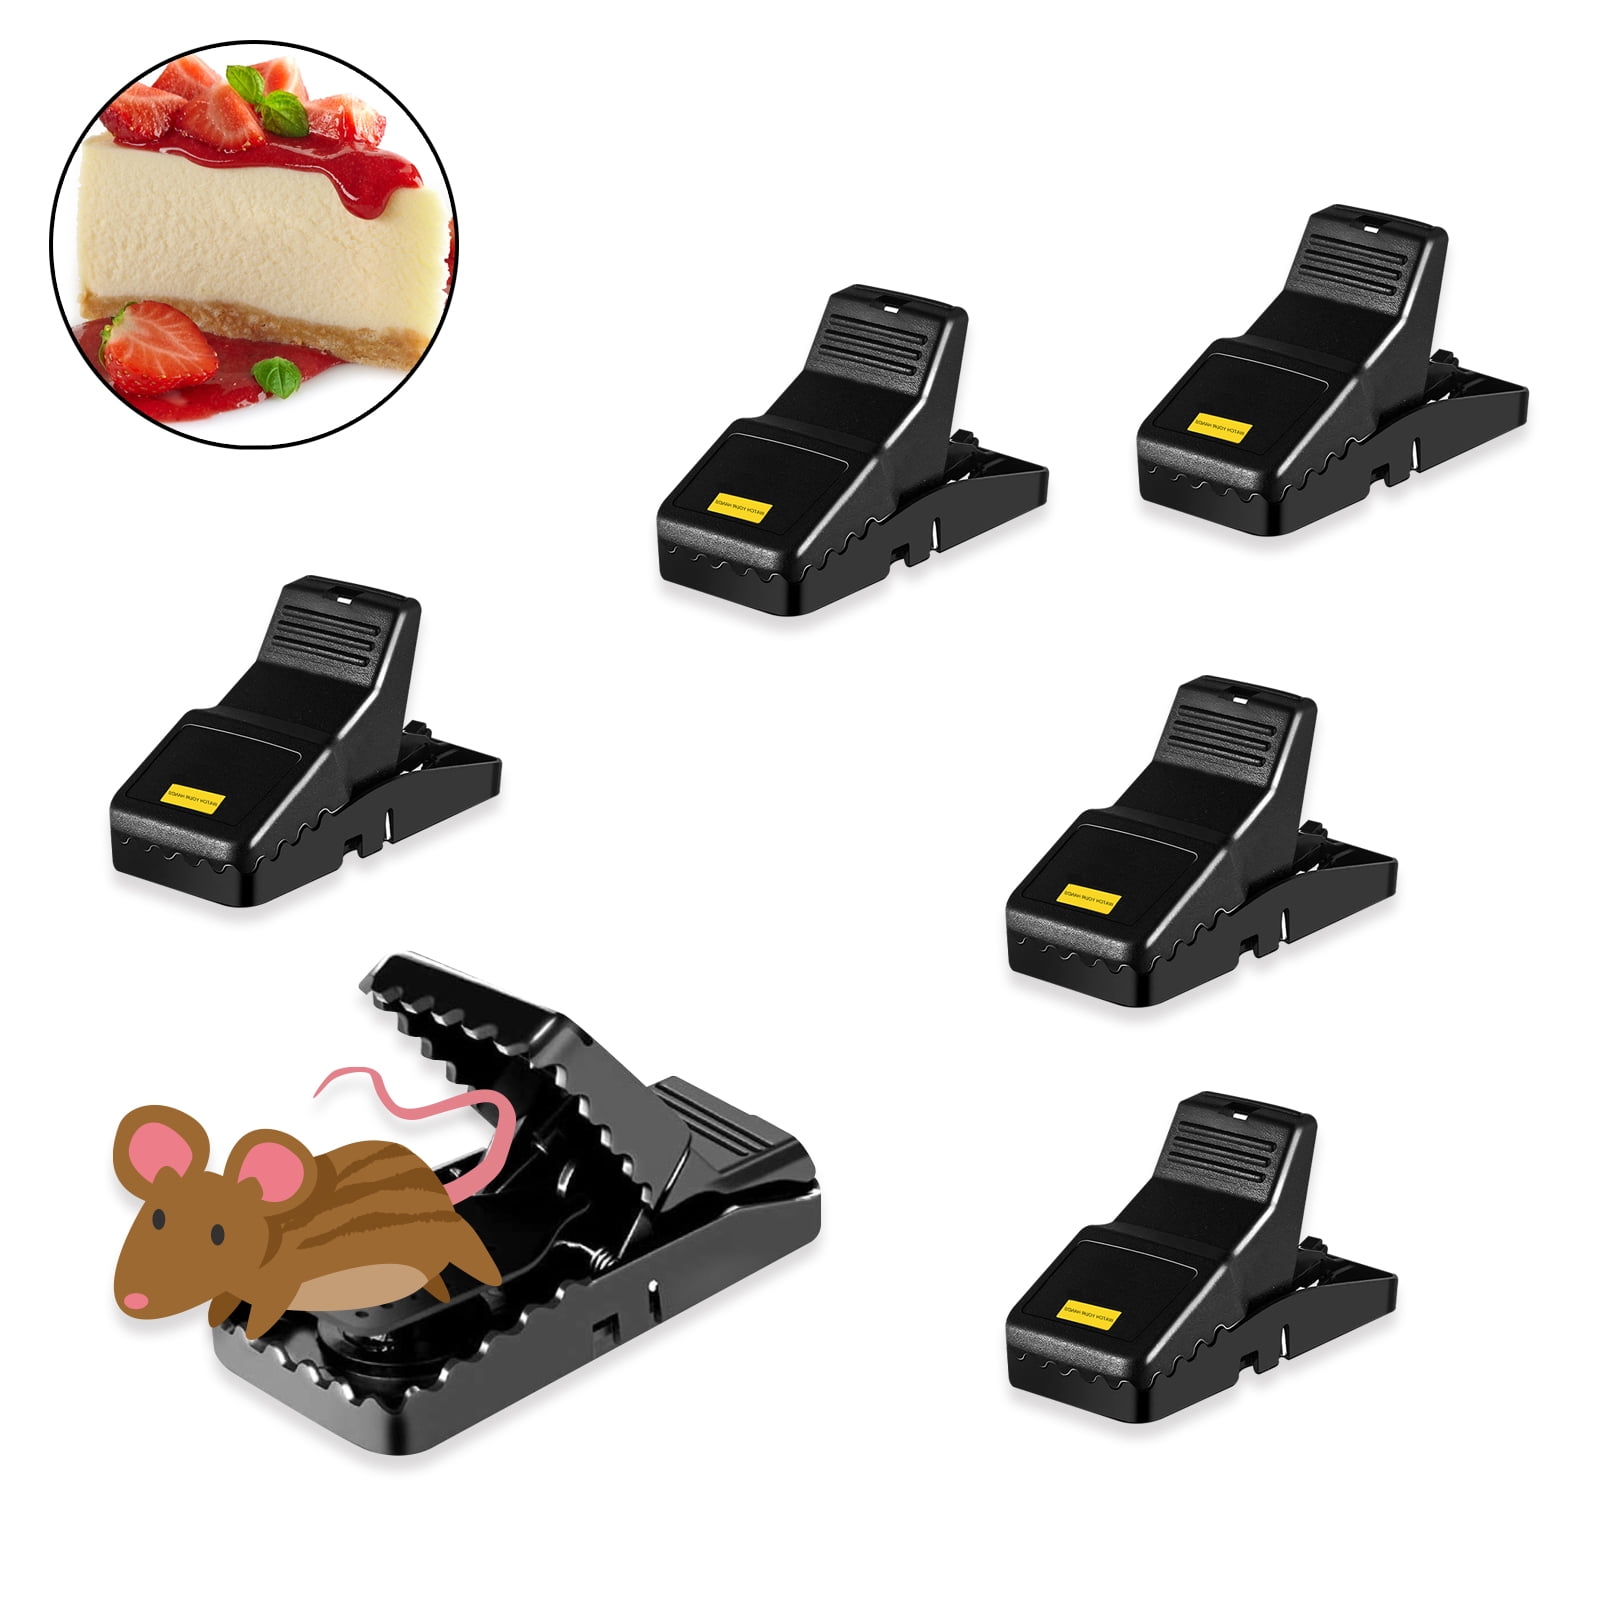 Seepis Mouse Trap Mouse Traps Indoor for Home,Reusable Mouse Traps for House